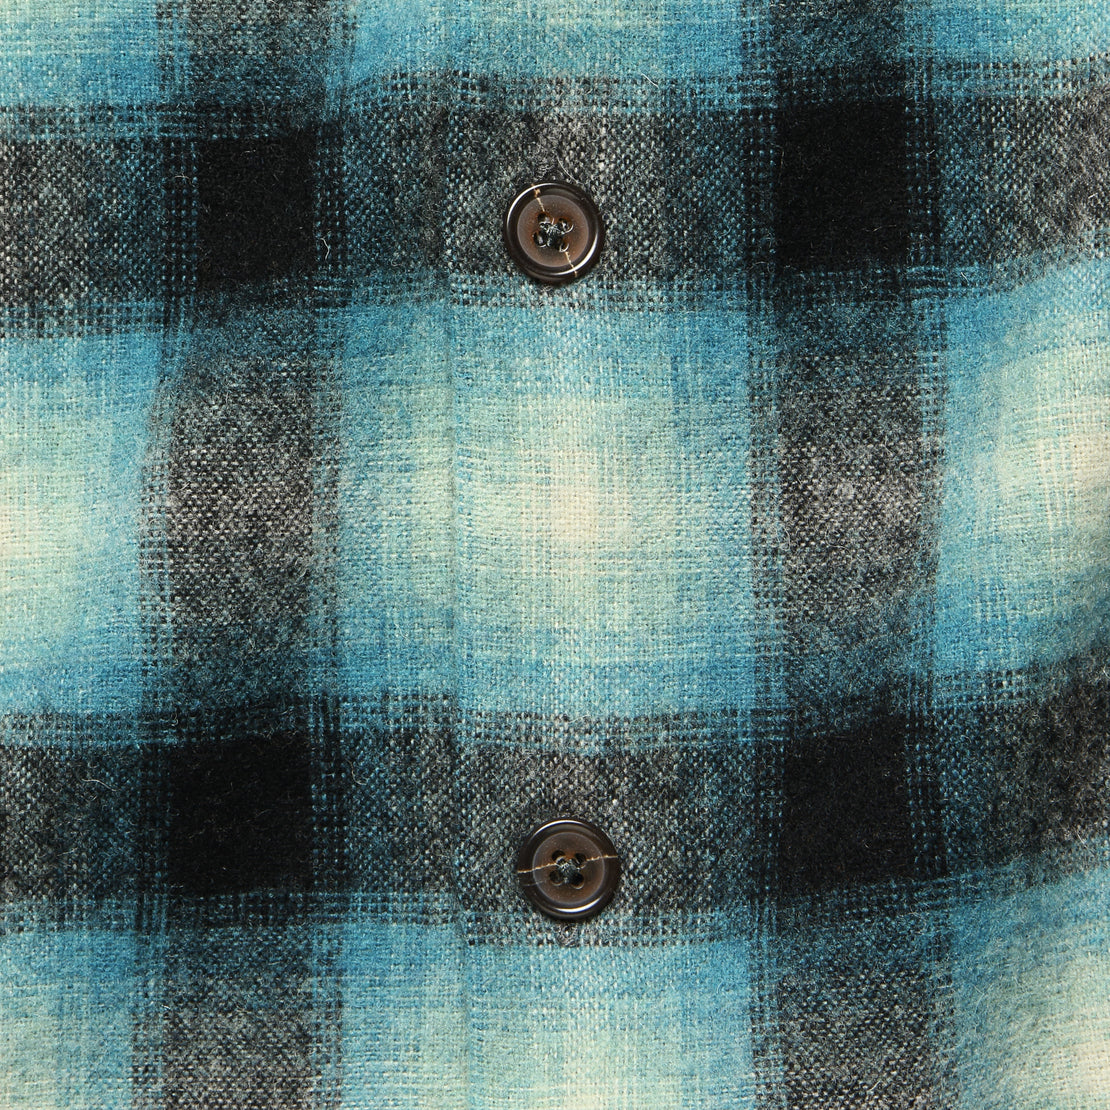 Utility Shirt - Turquoise Check - Universal Works - STAG Provisions - Tops - L/S Woven - Plaid